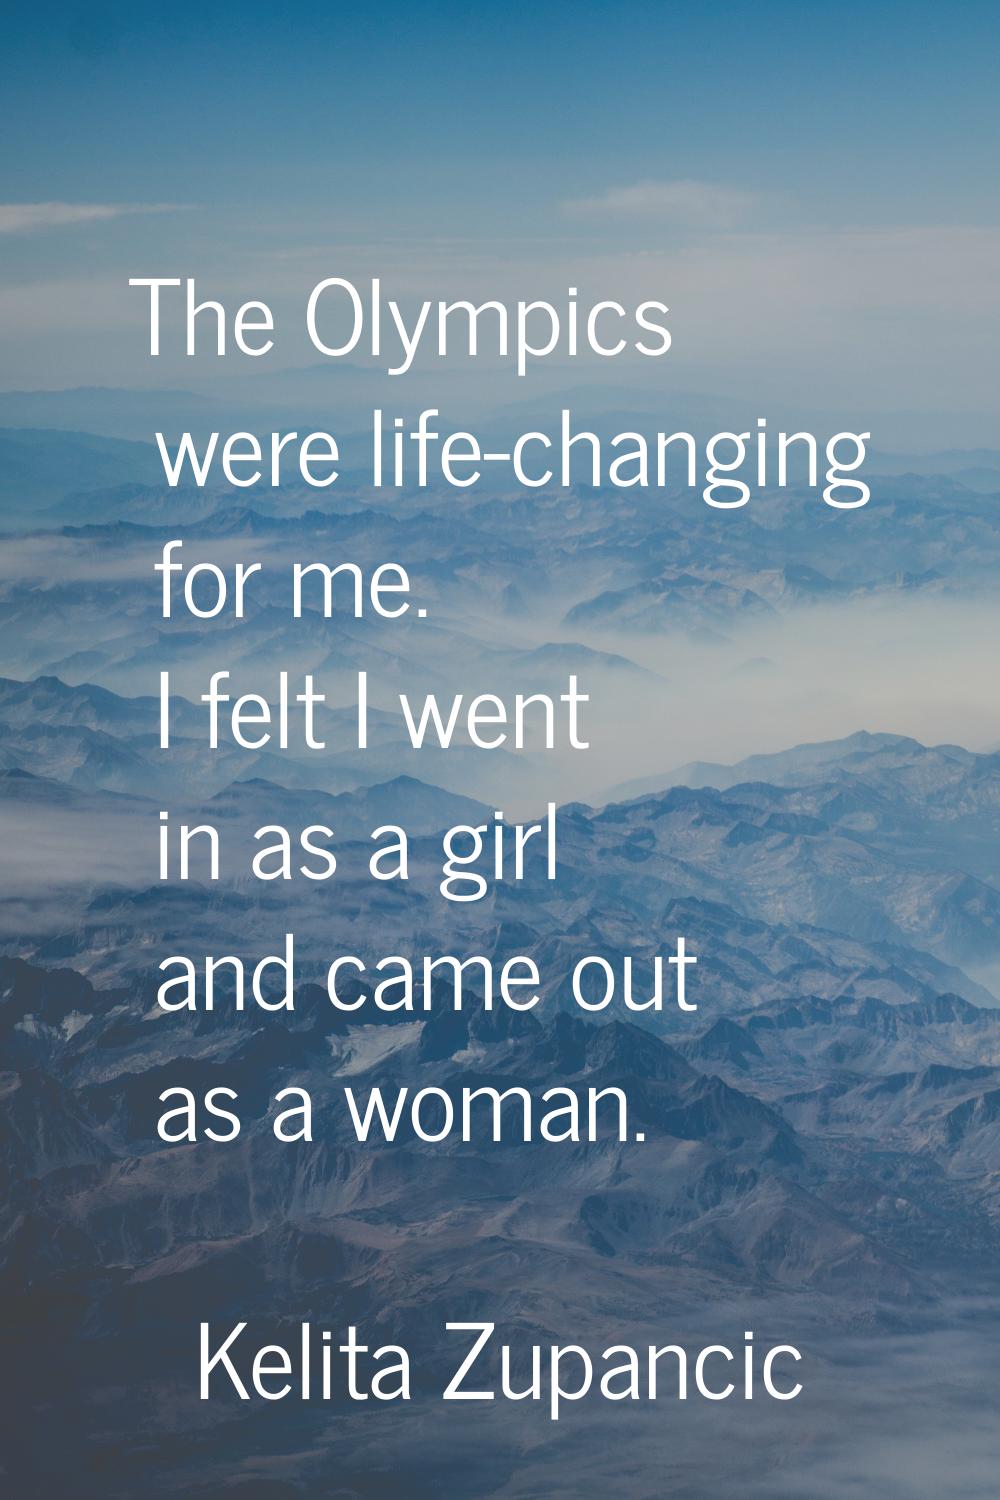 The Olympics were life-changing for me. I felt I went in as a girl and came out as a woman.